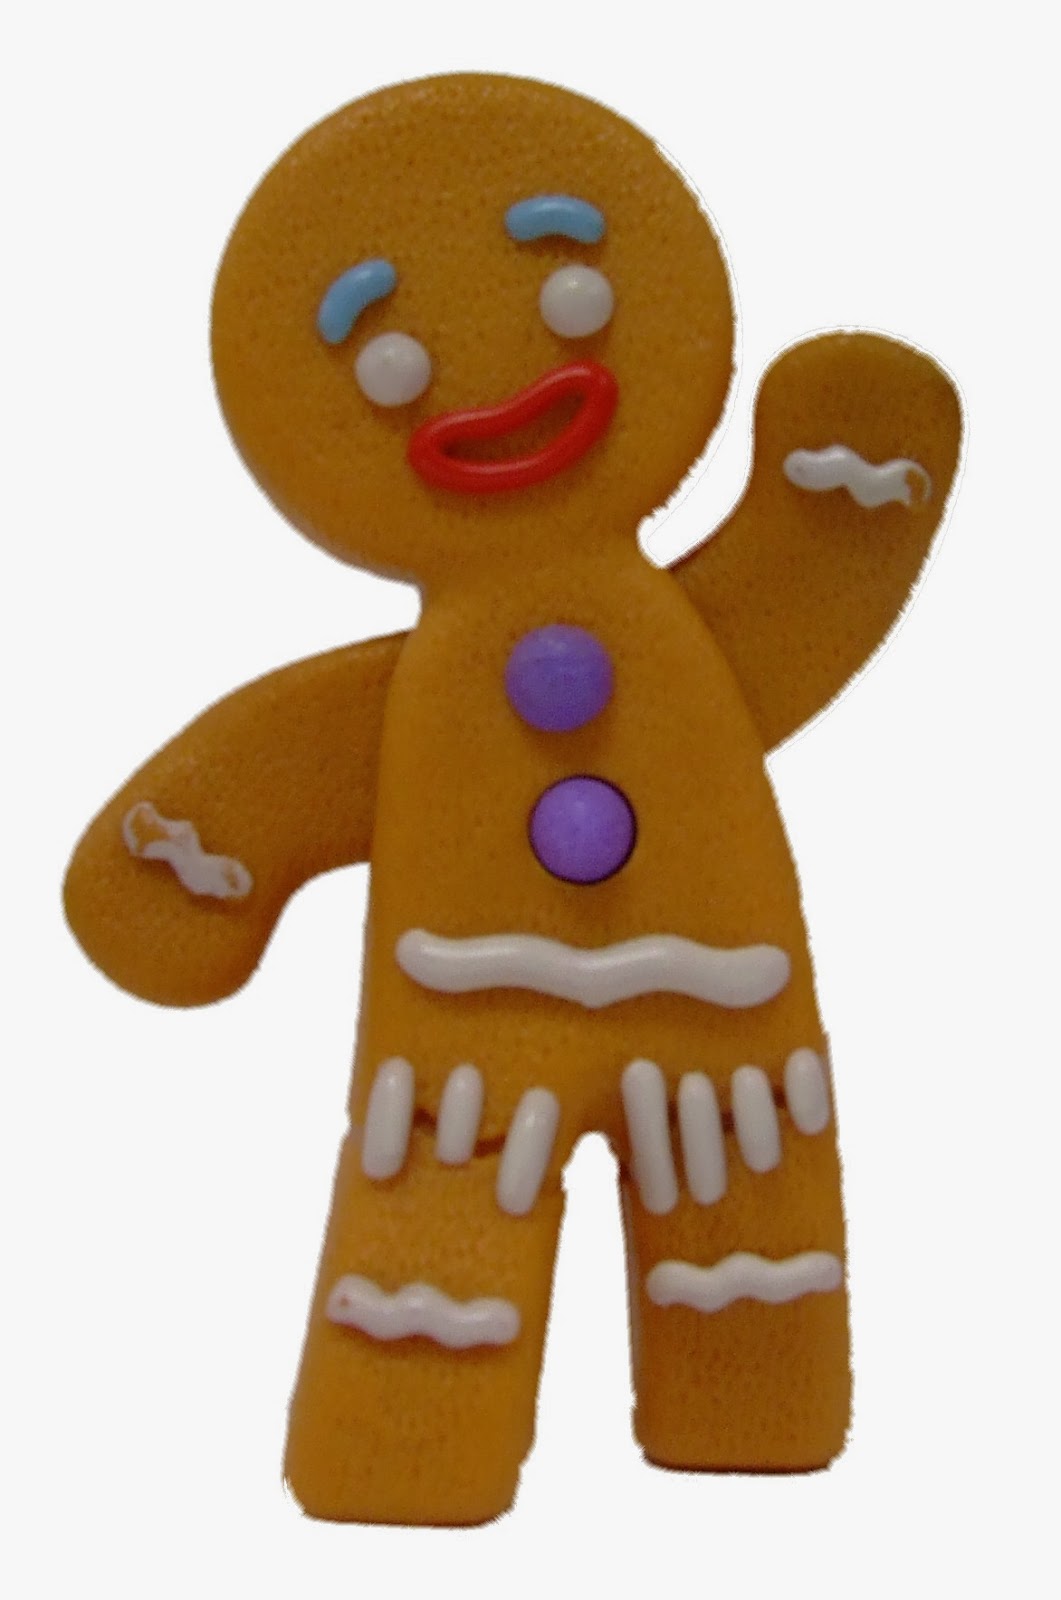 My Frugal Musings: The Dirty Laundry of the Gingerbread Man